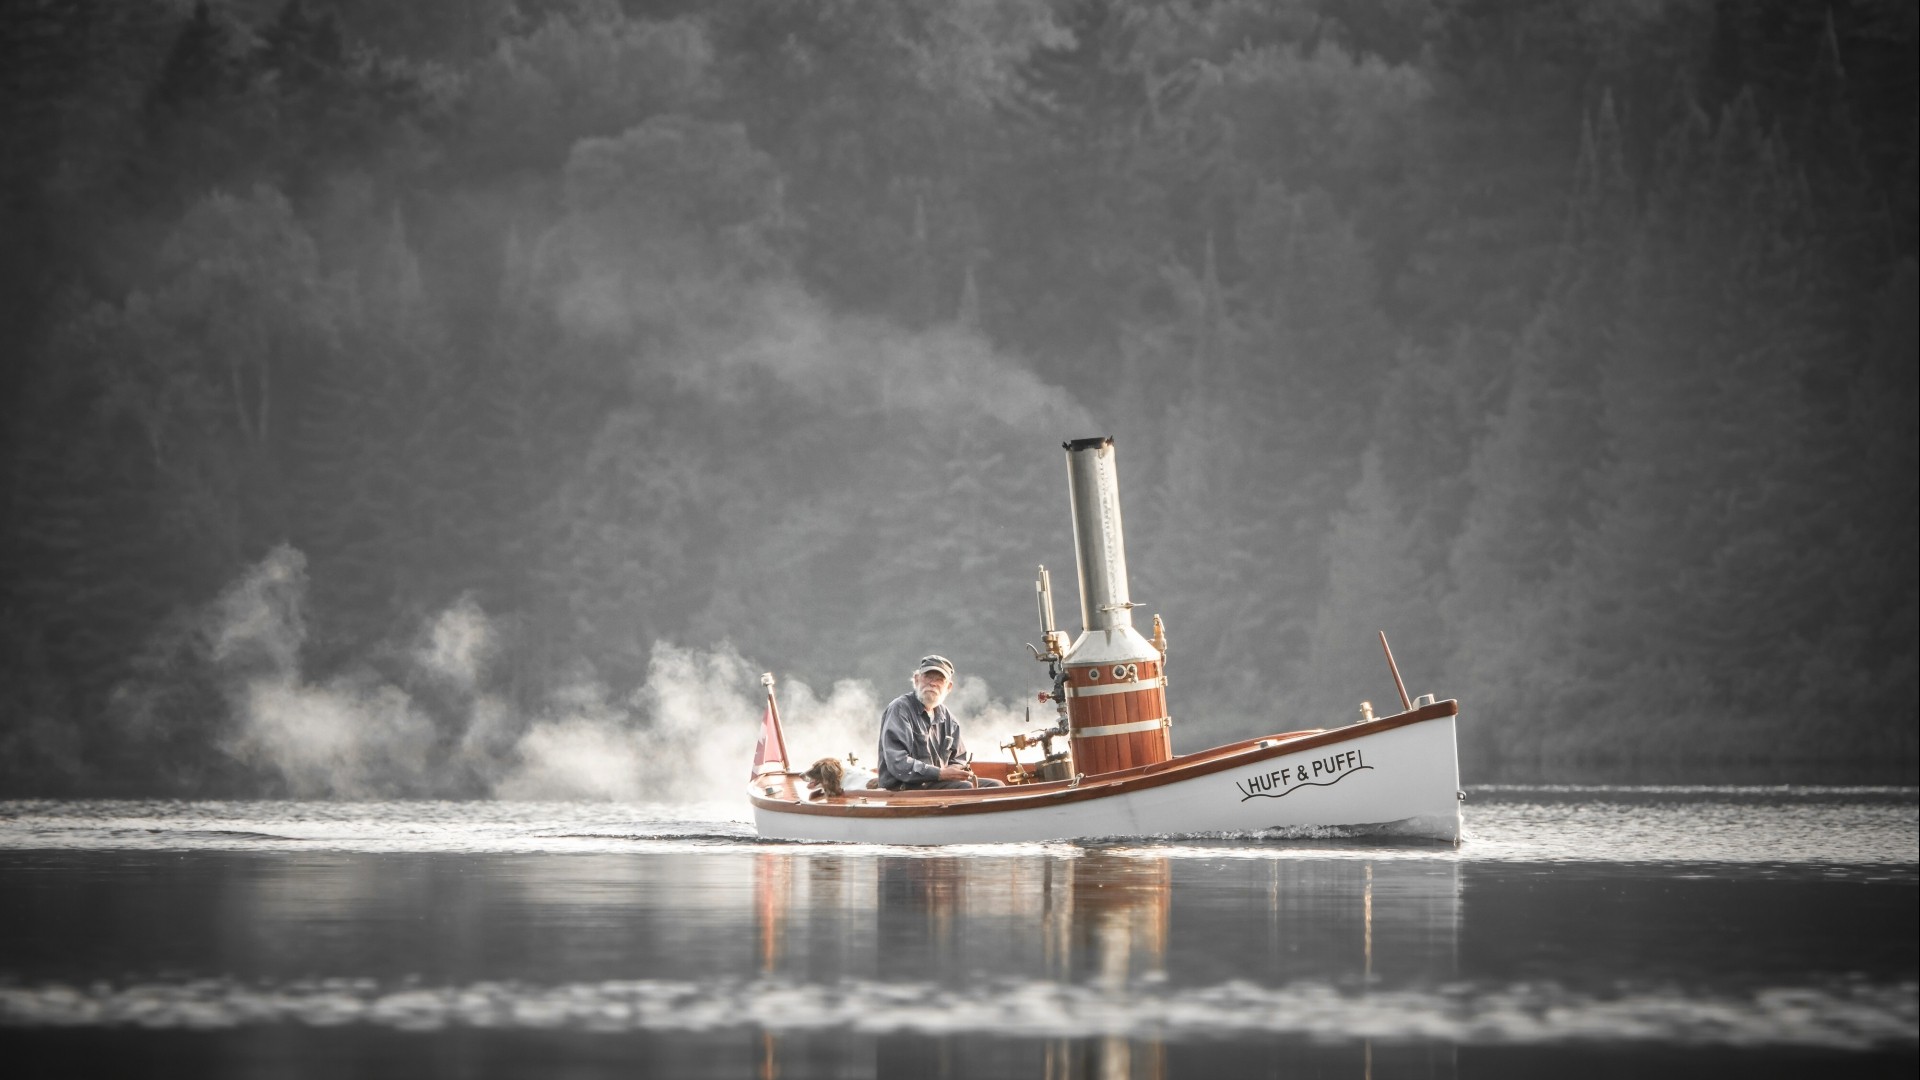 General 1920x1080 nature landscape water boat men old people sailors beard steamship smoke mist lake trees forest pine trees reflection chimneys vehicle